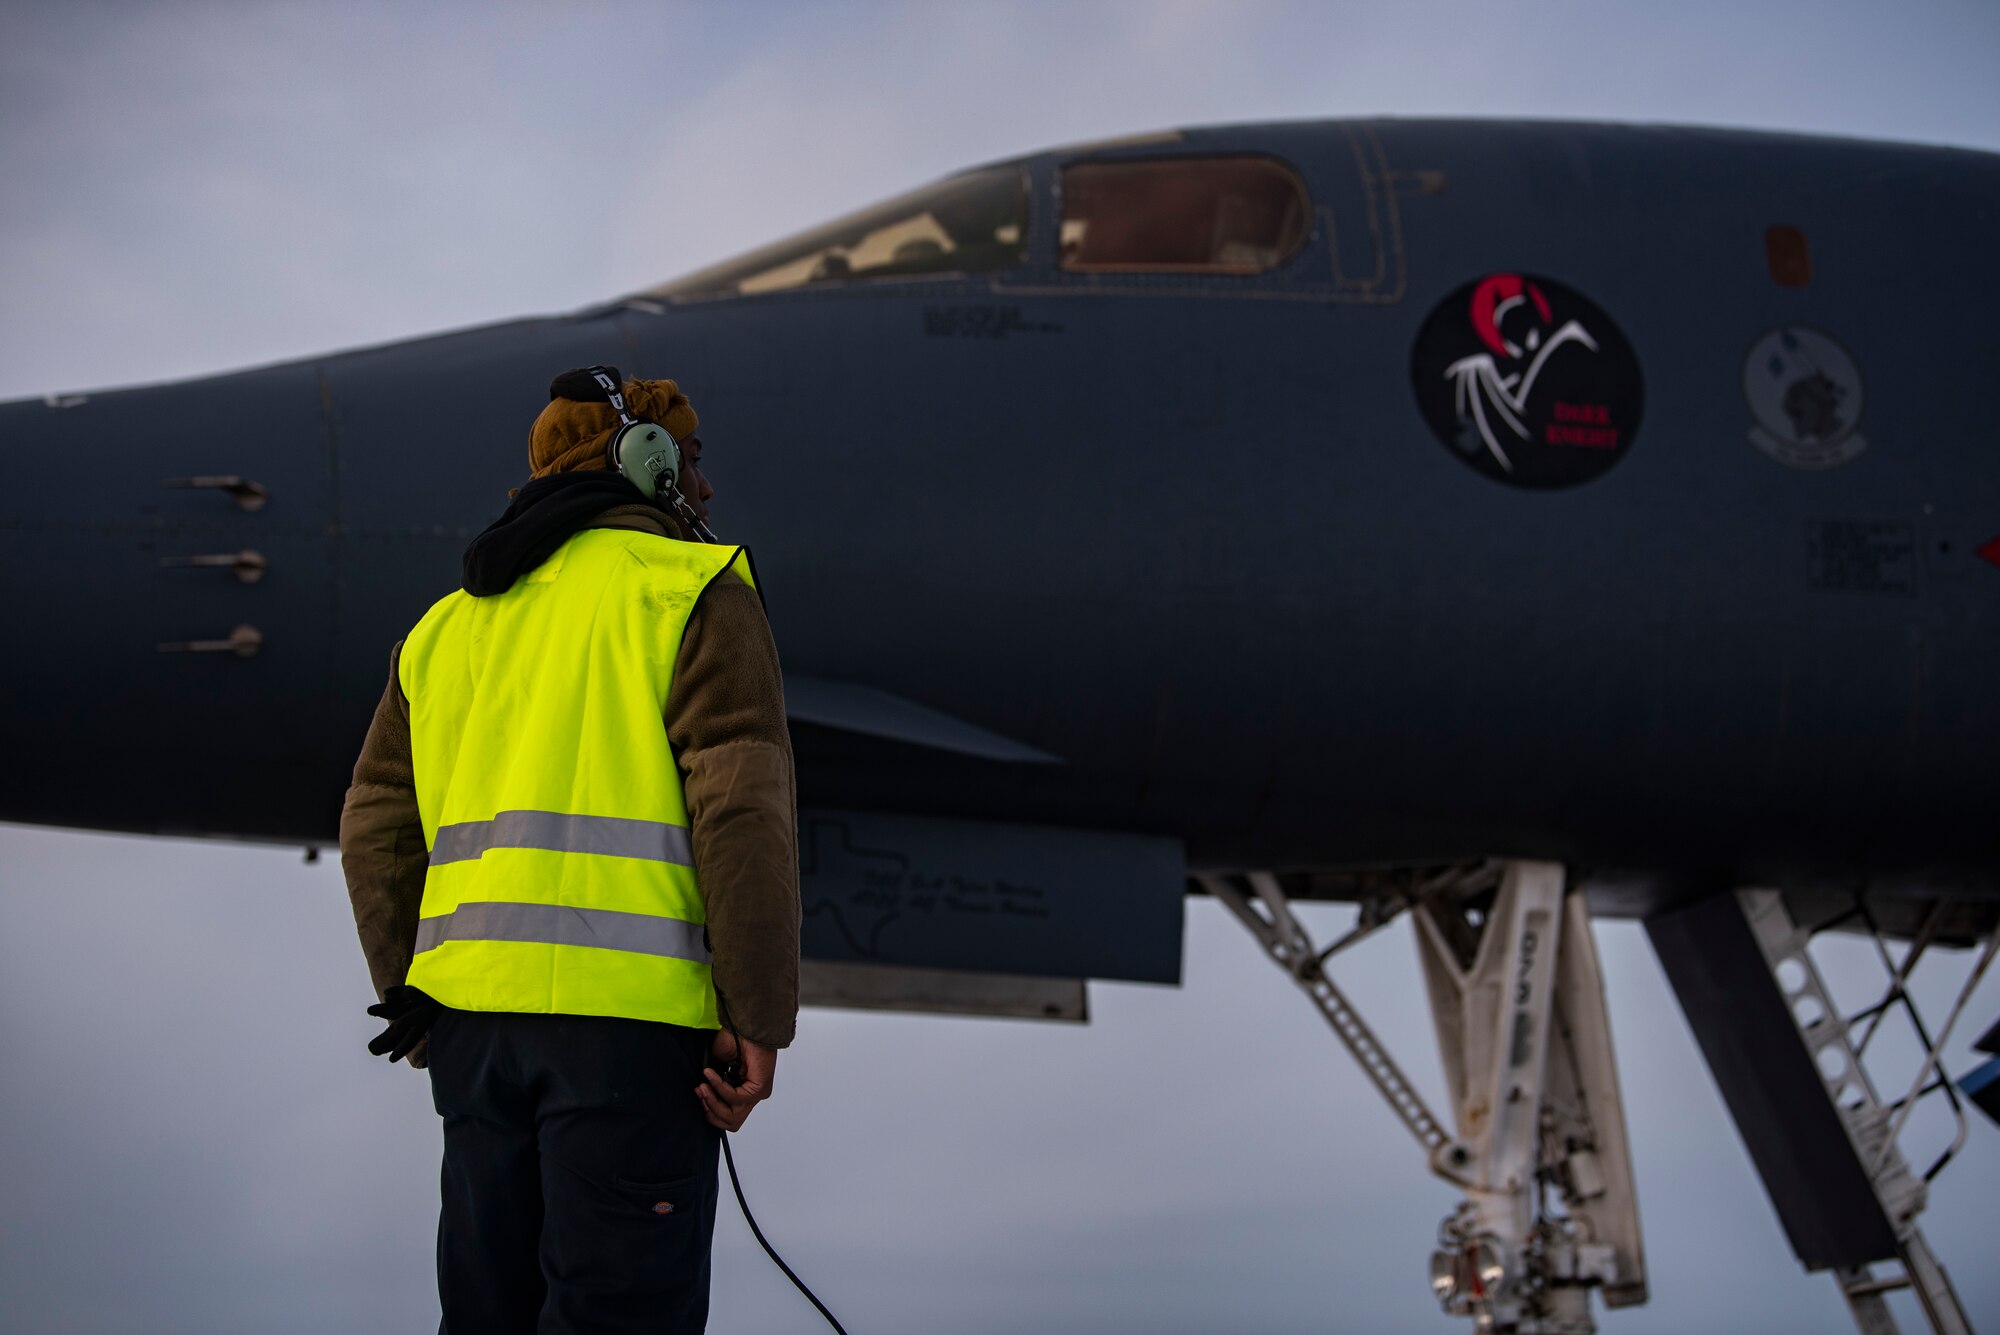 A crew chief assigned to the 9th Expeditionary Bomb Squadron communicates with B-1B Lancer aircrew prior to take-off at Ørland Air Force Base, Norway, March 8, 2021. The 9th Expeditionary Bomb Squadron deployed to Ørland AFS in support of a Bomber Task Force Europe deployment to conduct a series of training missions while integrating with NATO allies and partner forces. (U.S. Air Force photo by Airman 1st Class Colin Hollowell)